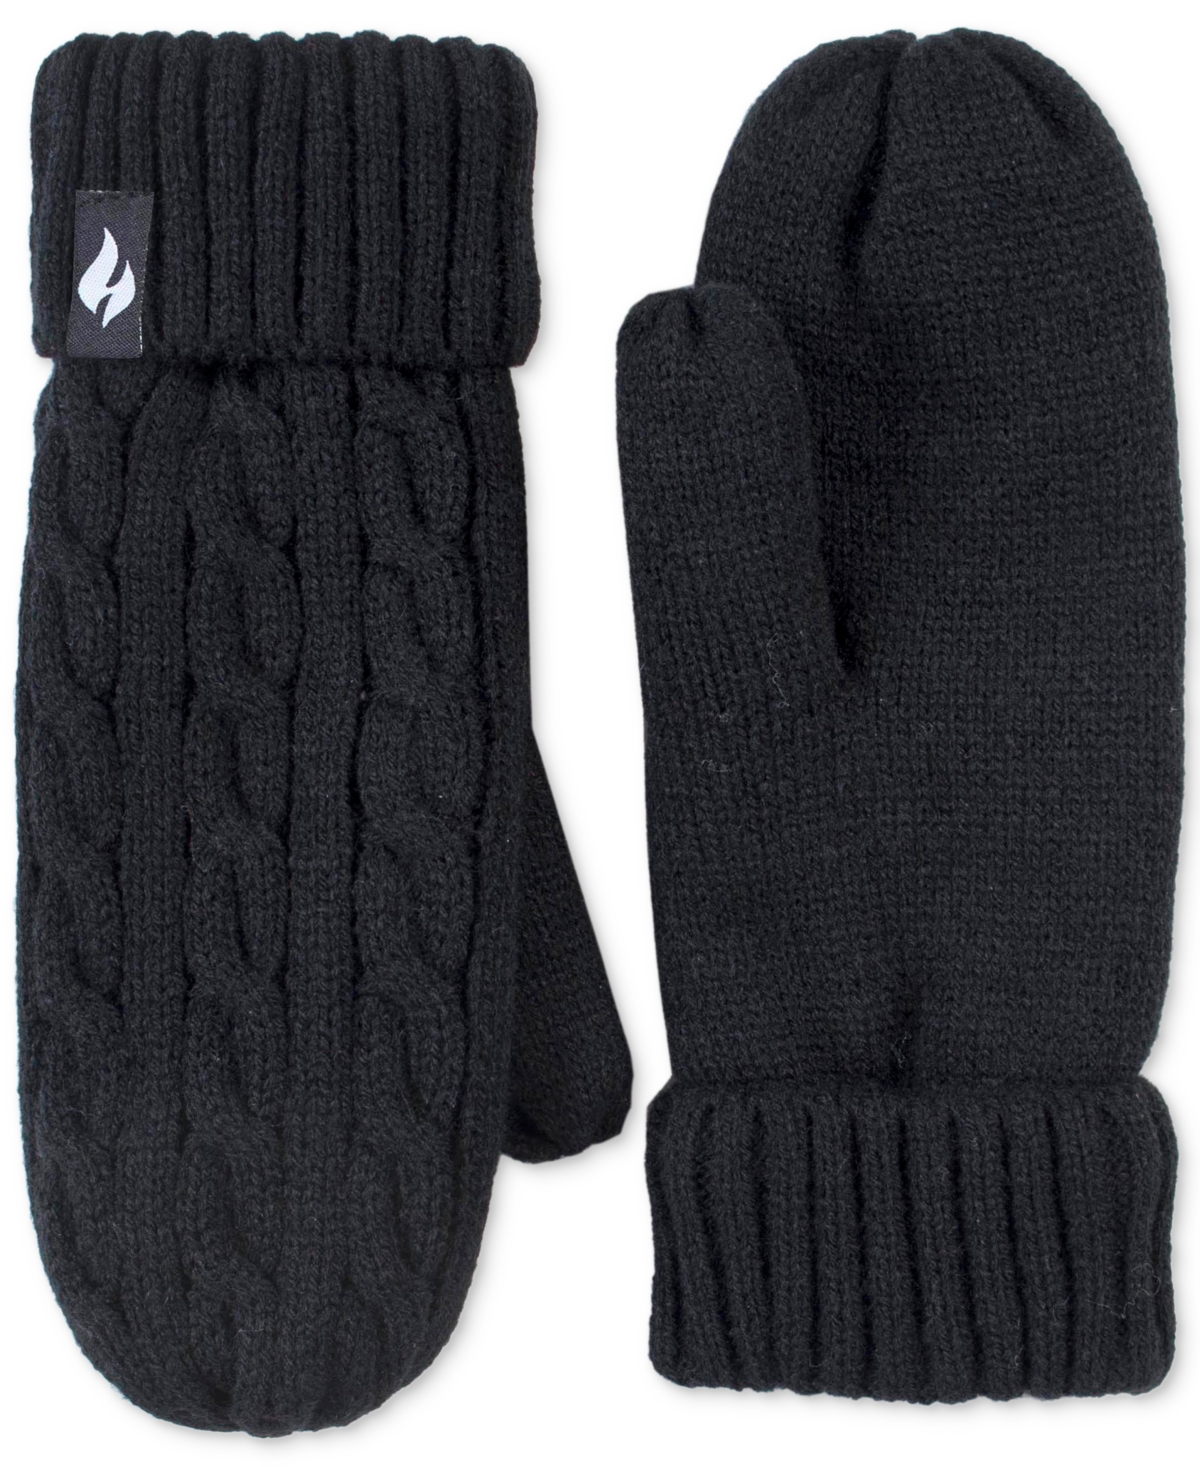 Jackie Cable Knit Mittens - Buttercream